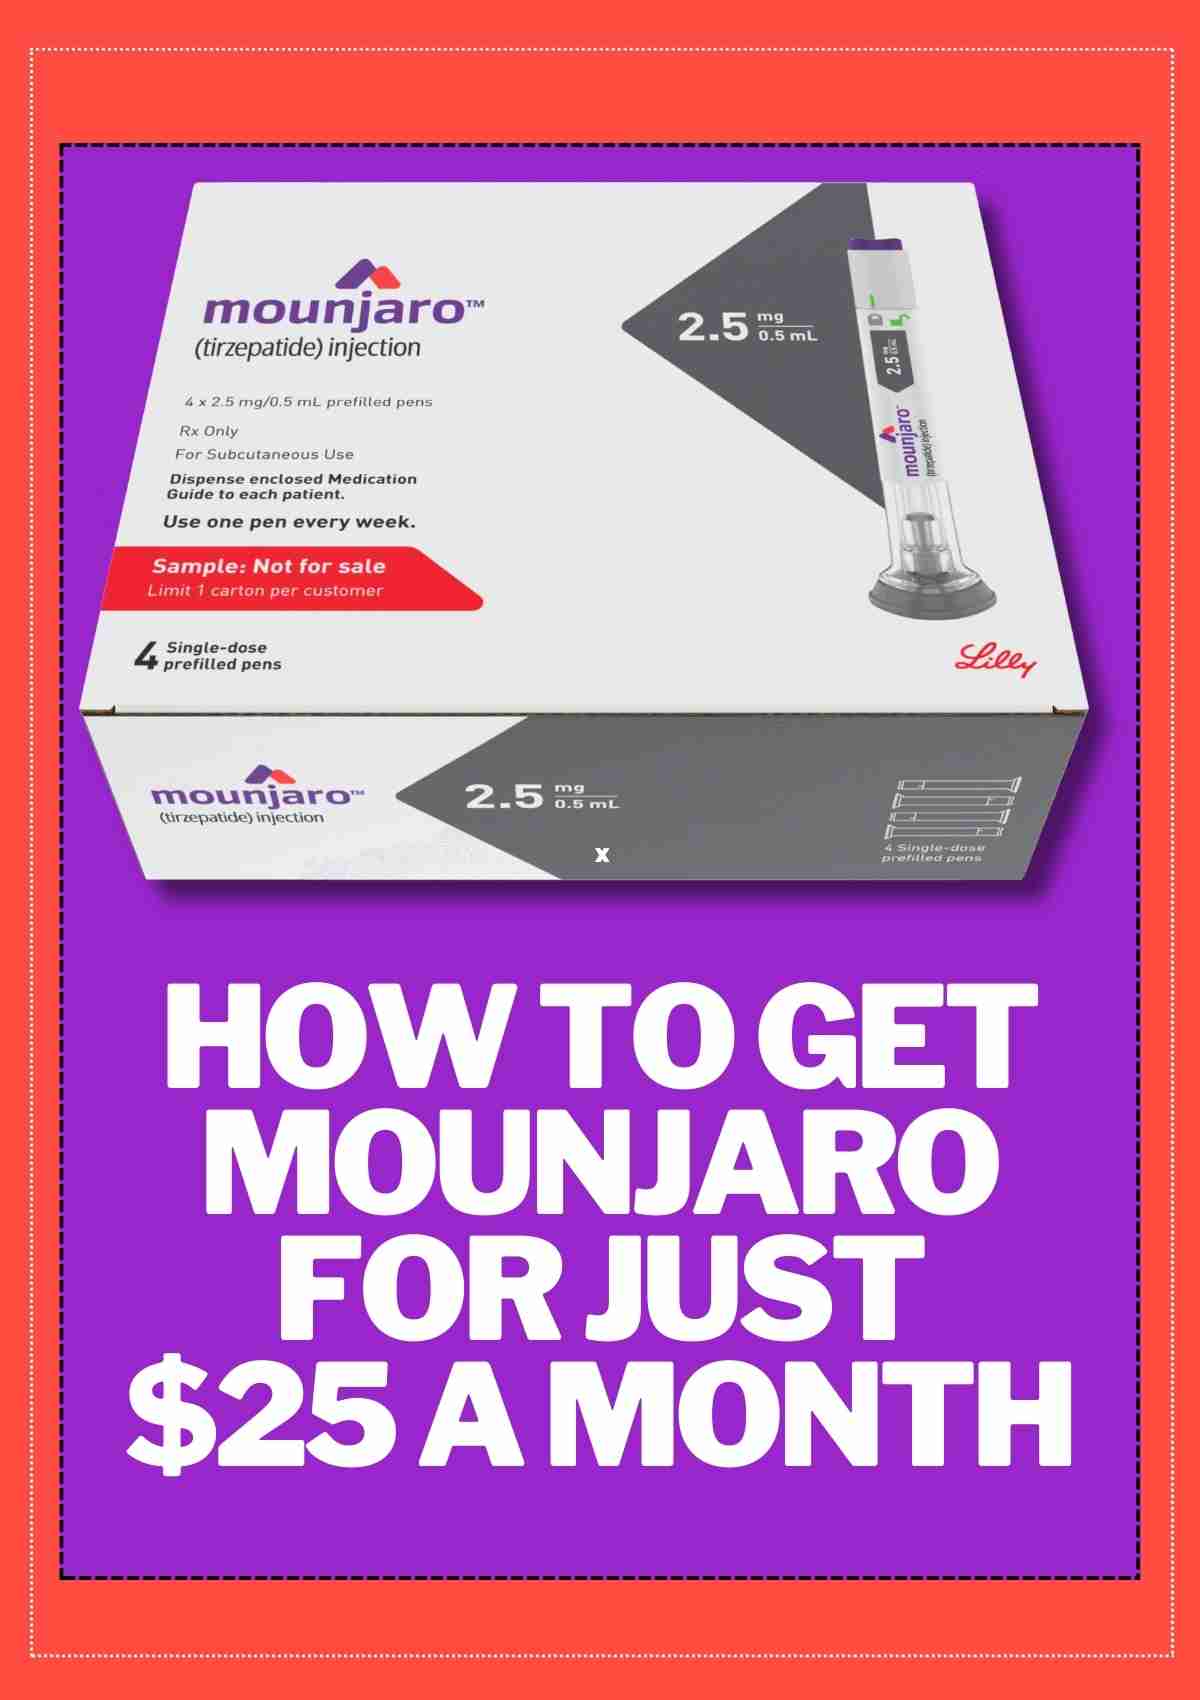 how to get mounjaro for $25 a month